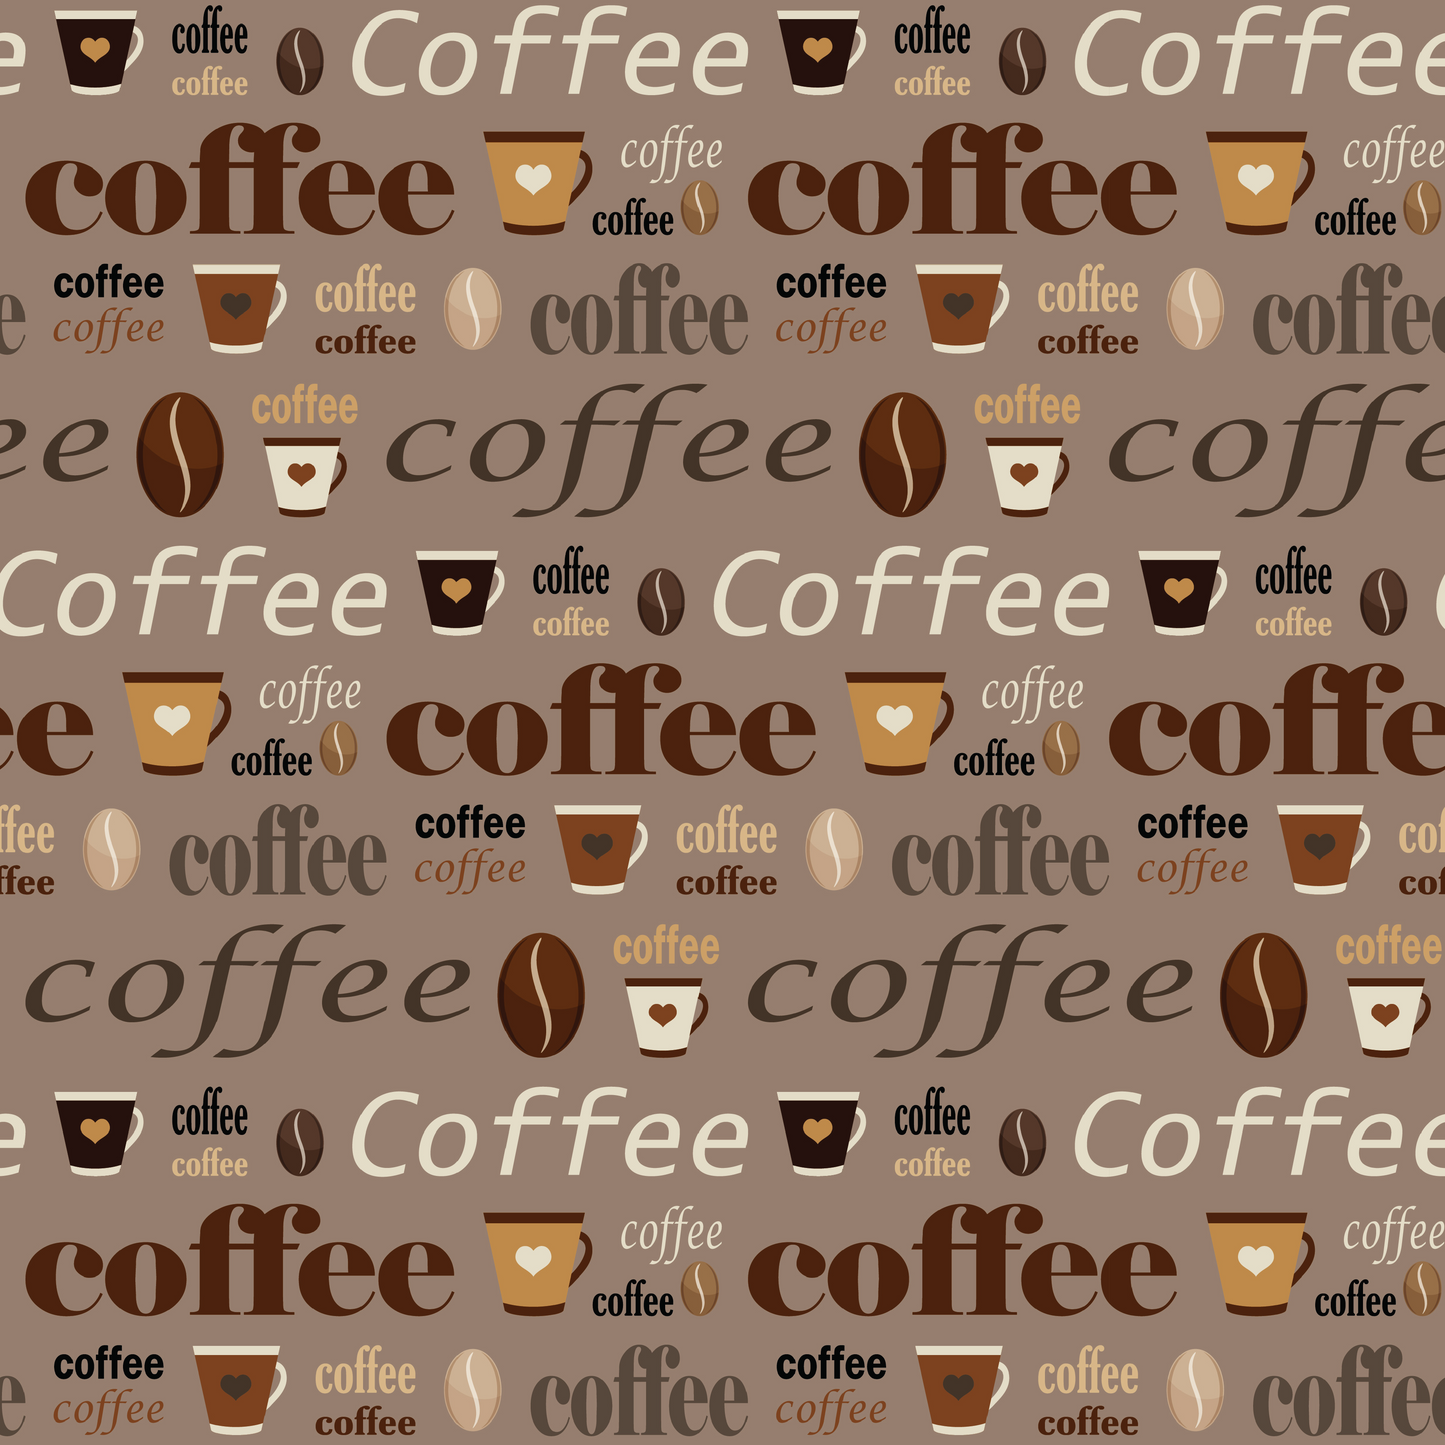 Coffee - Coffee Text with Dark Background 010